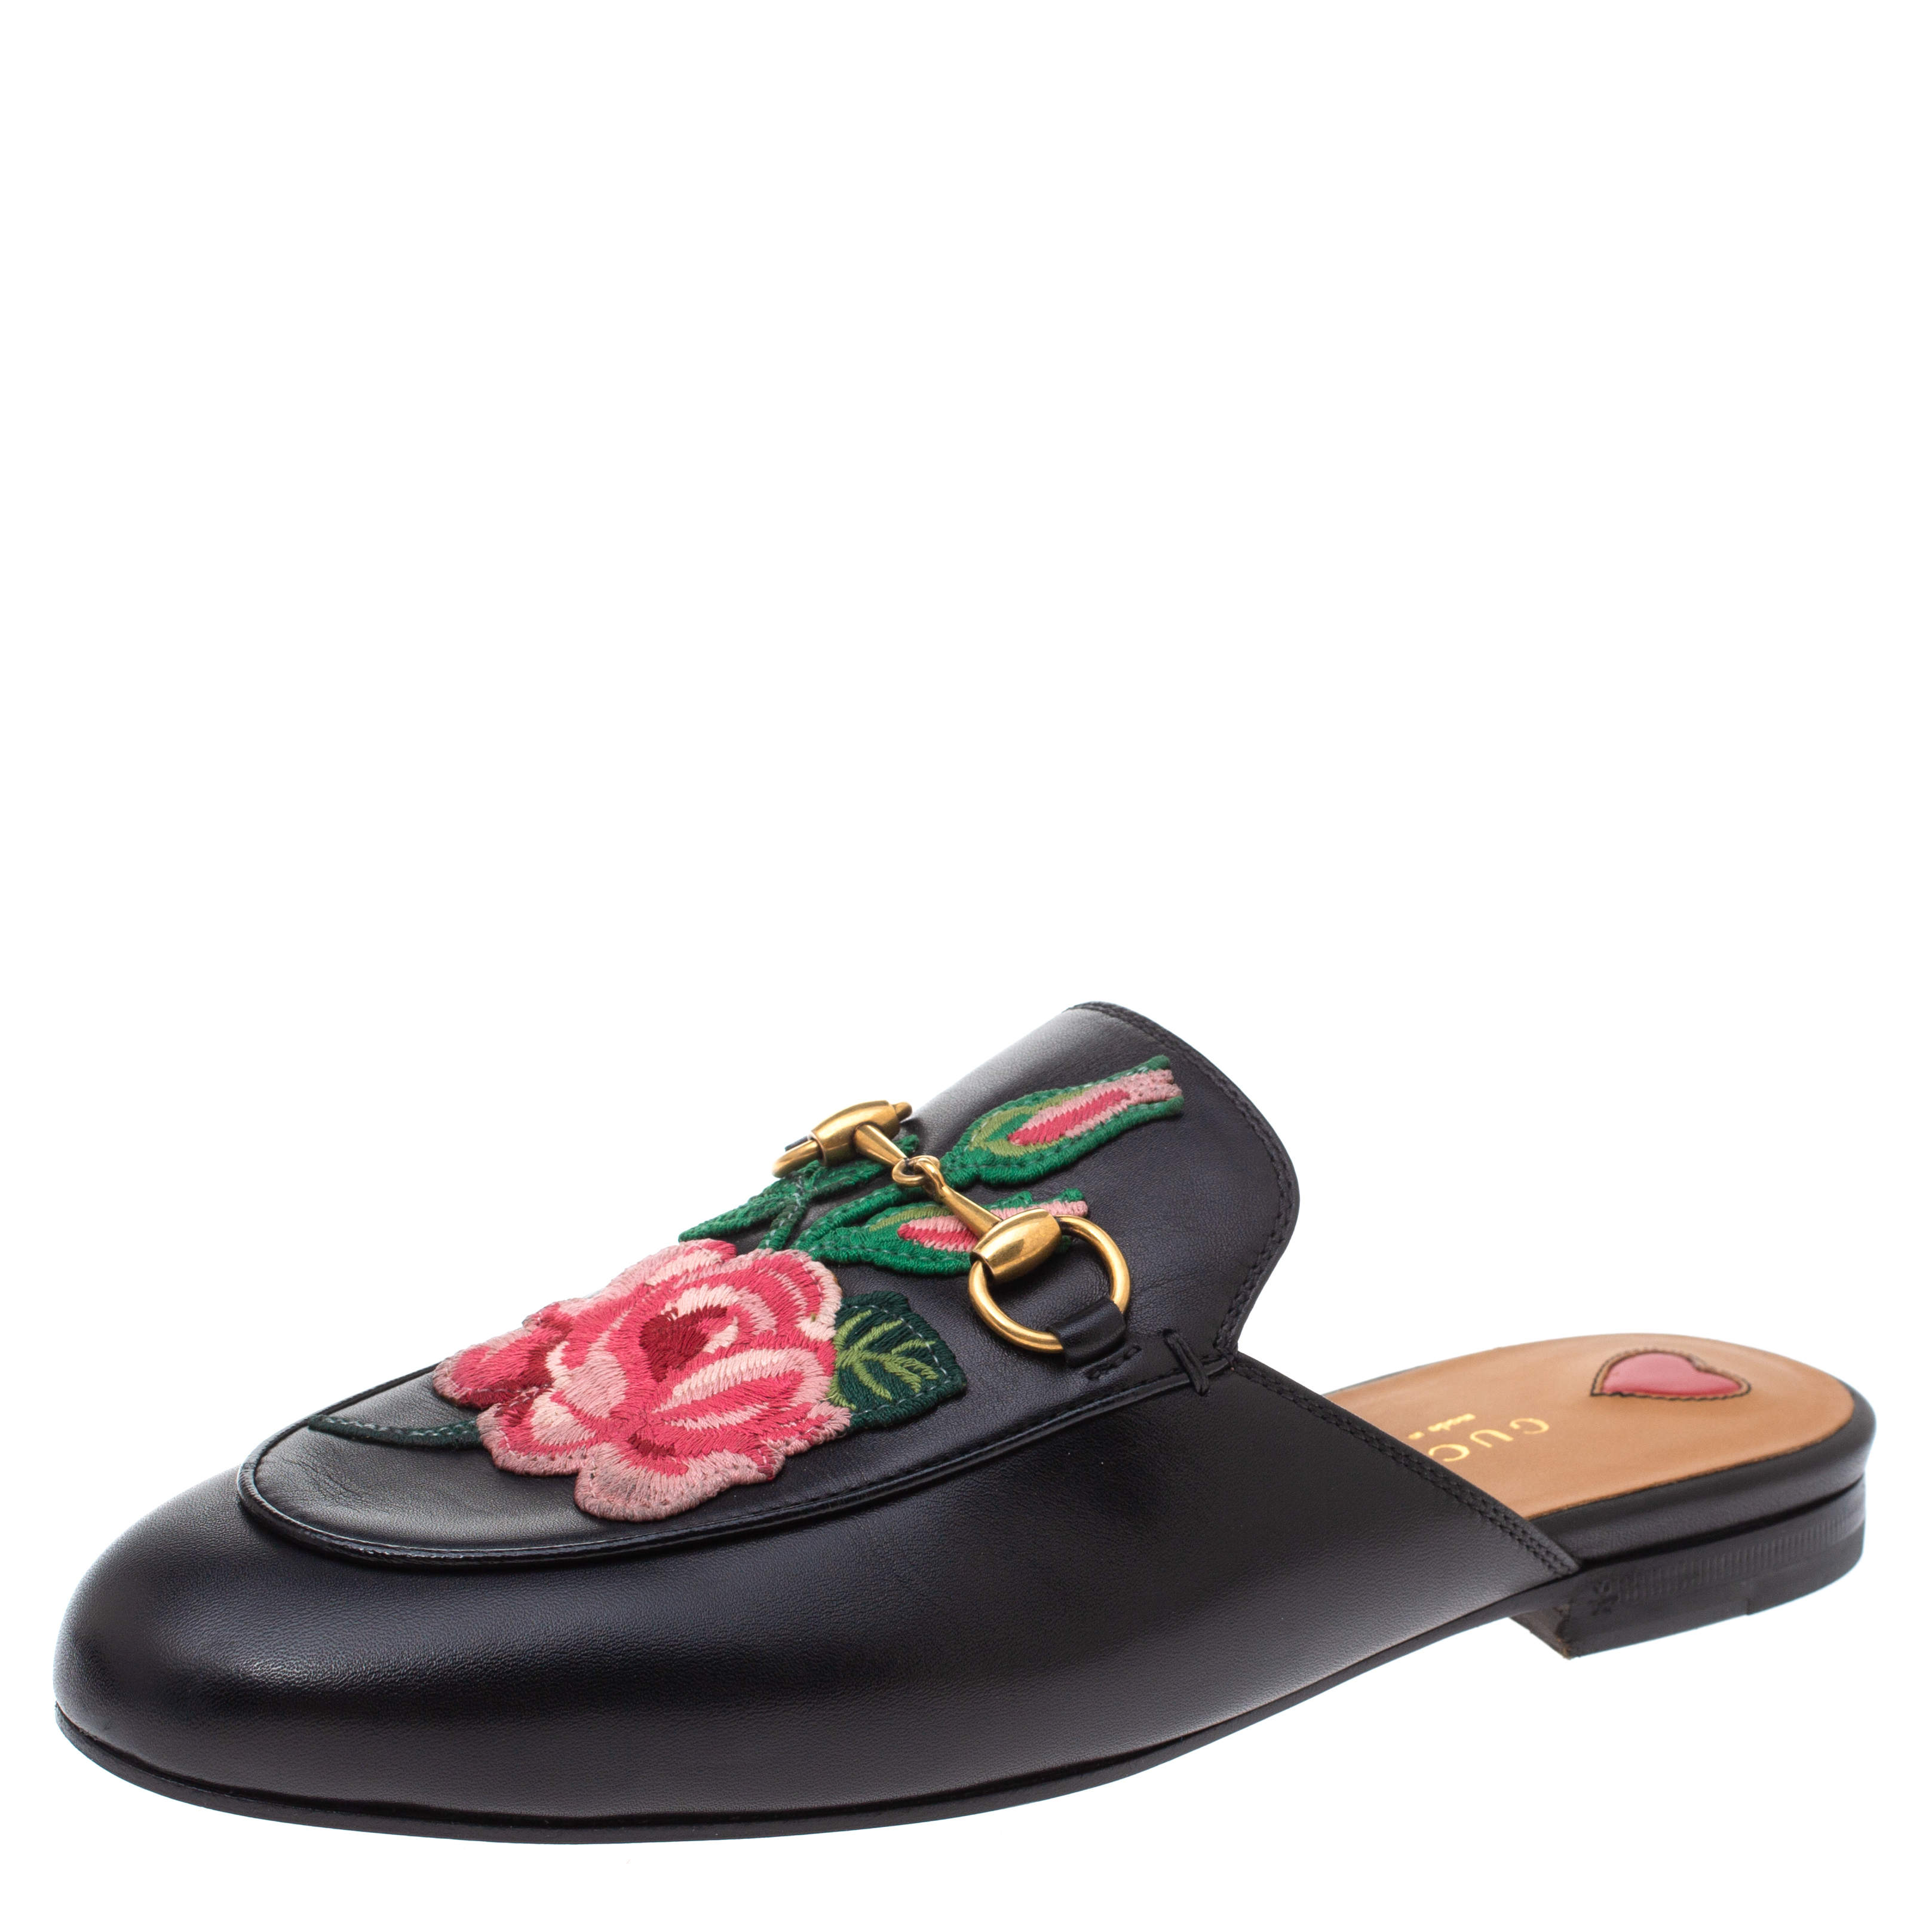 Gucci Black Leather Princetown Flower Embroidered Flat Mules Size 37